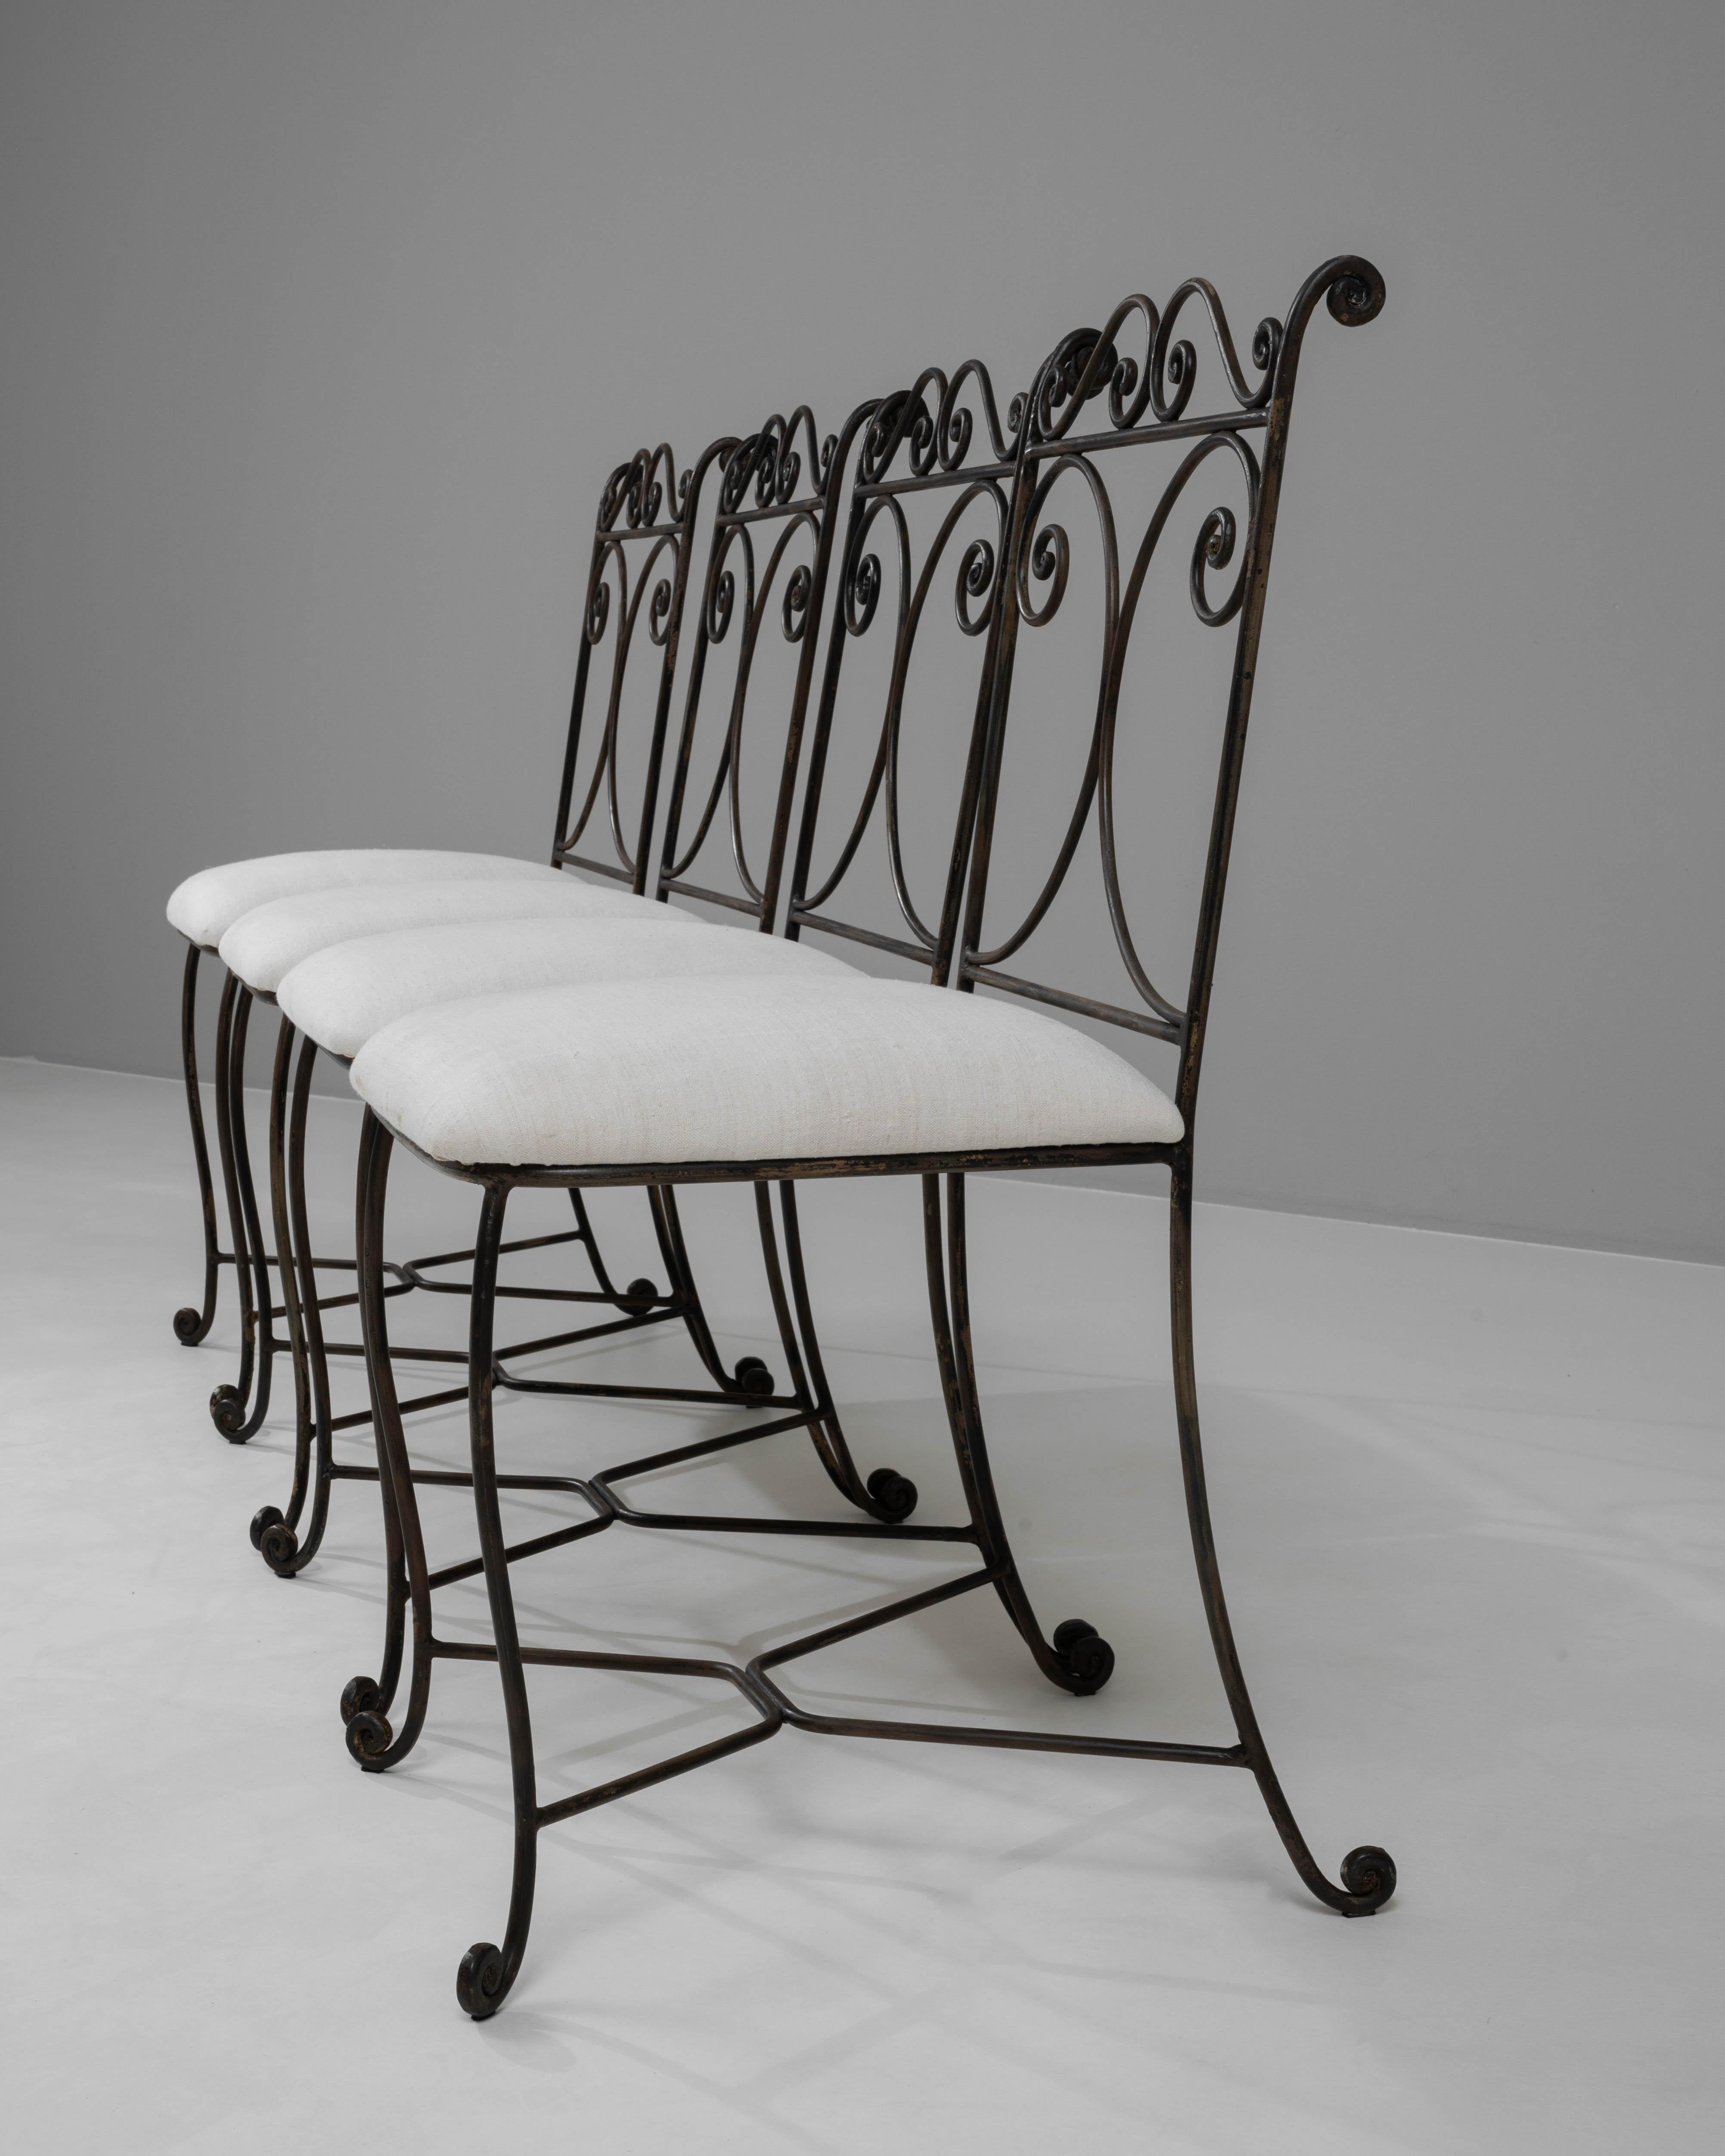 20th Century French Metal Chairs With Upholstered Seats, Set of 4 For Sale 10